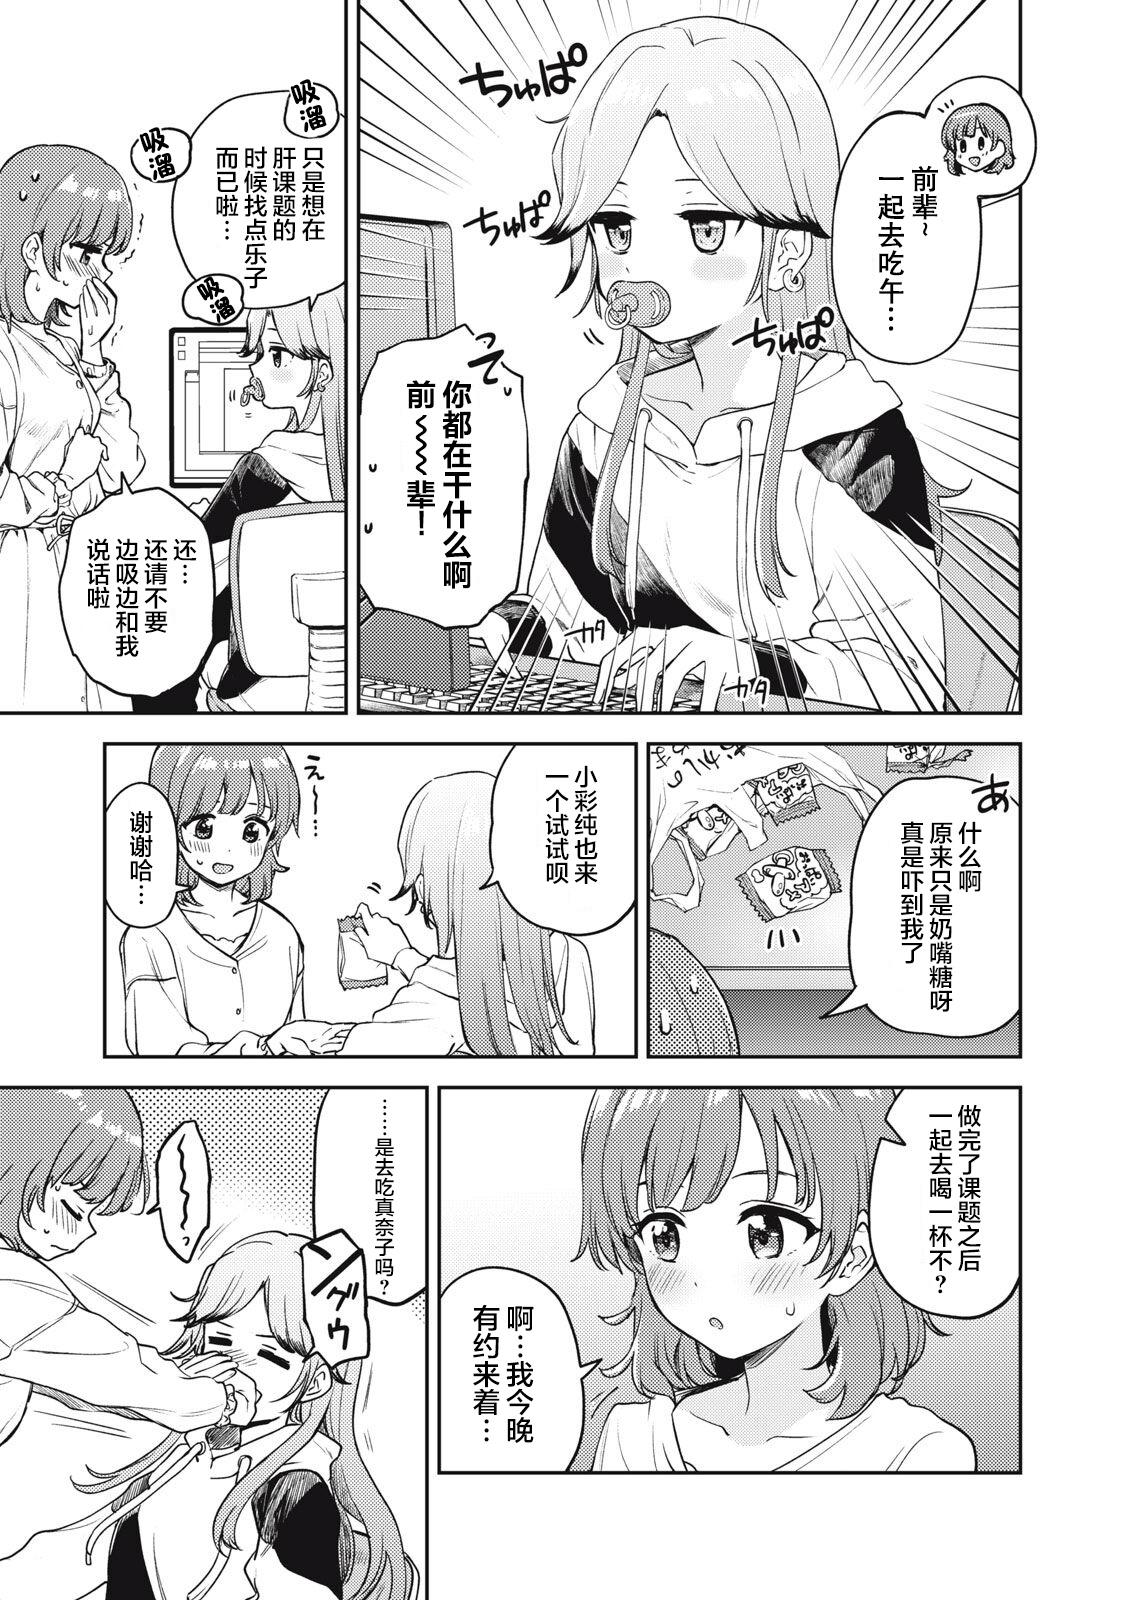 Cavala Asumi-chan Is Interested In Lesbian Brothels! Extra Episode Moan - Picture 1